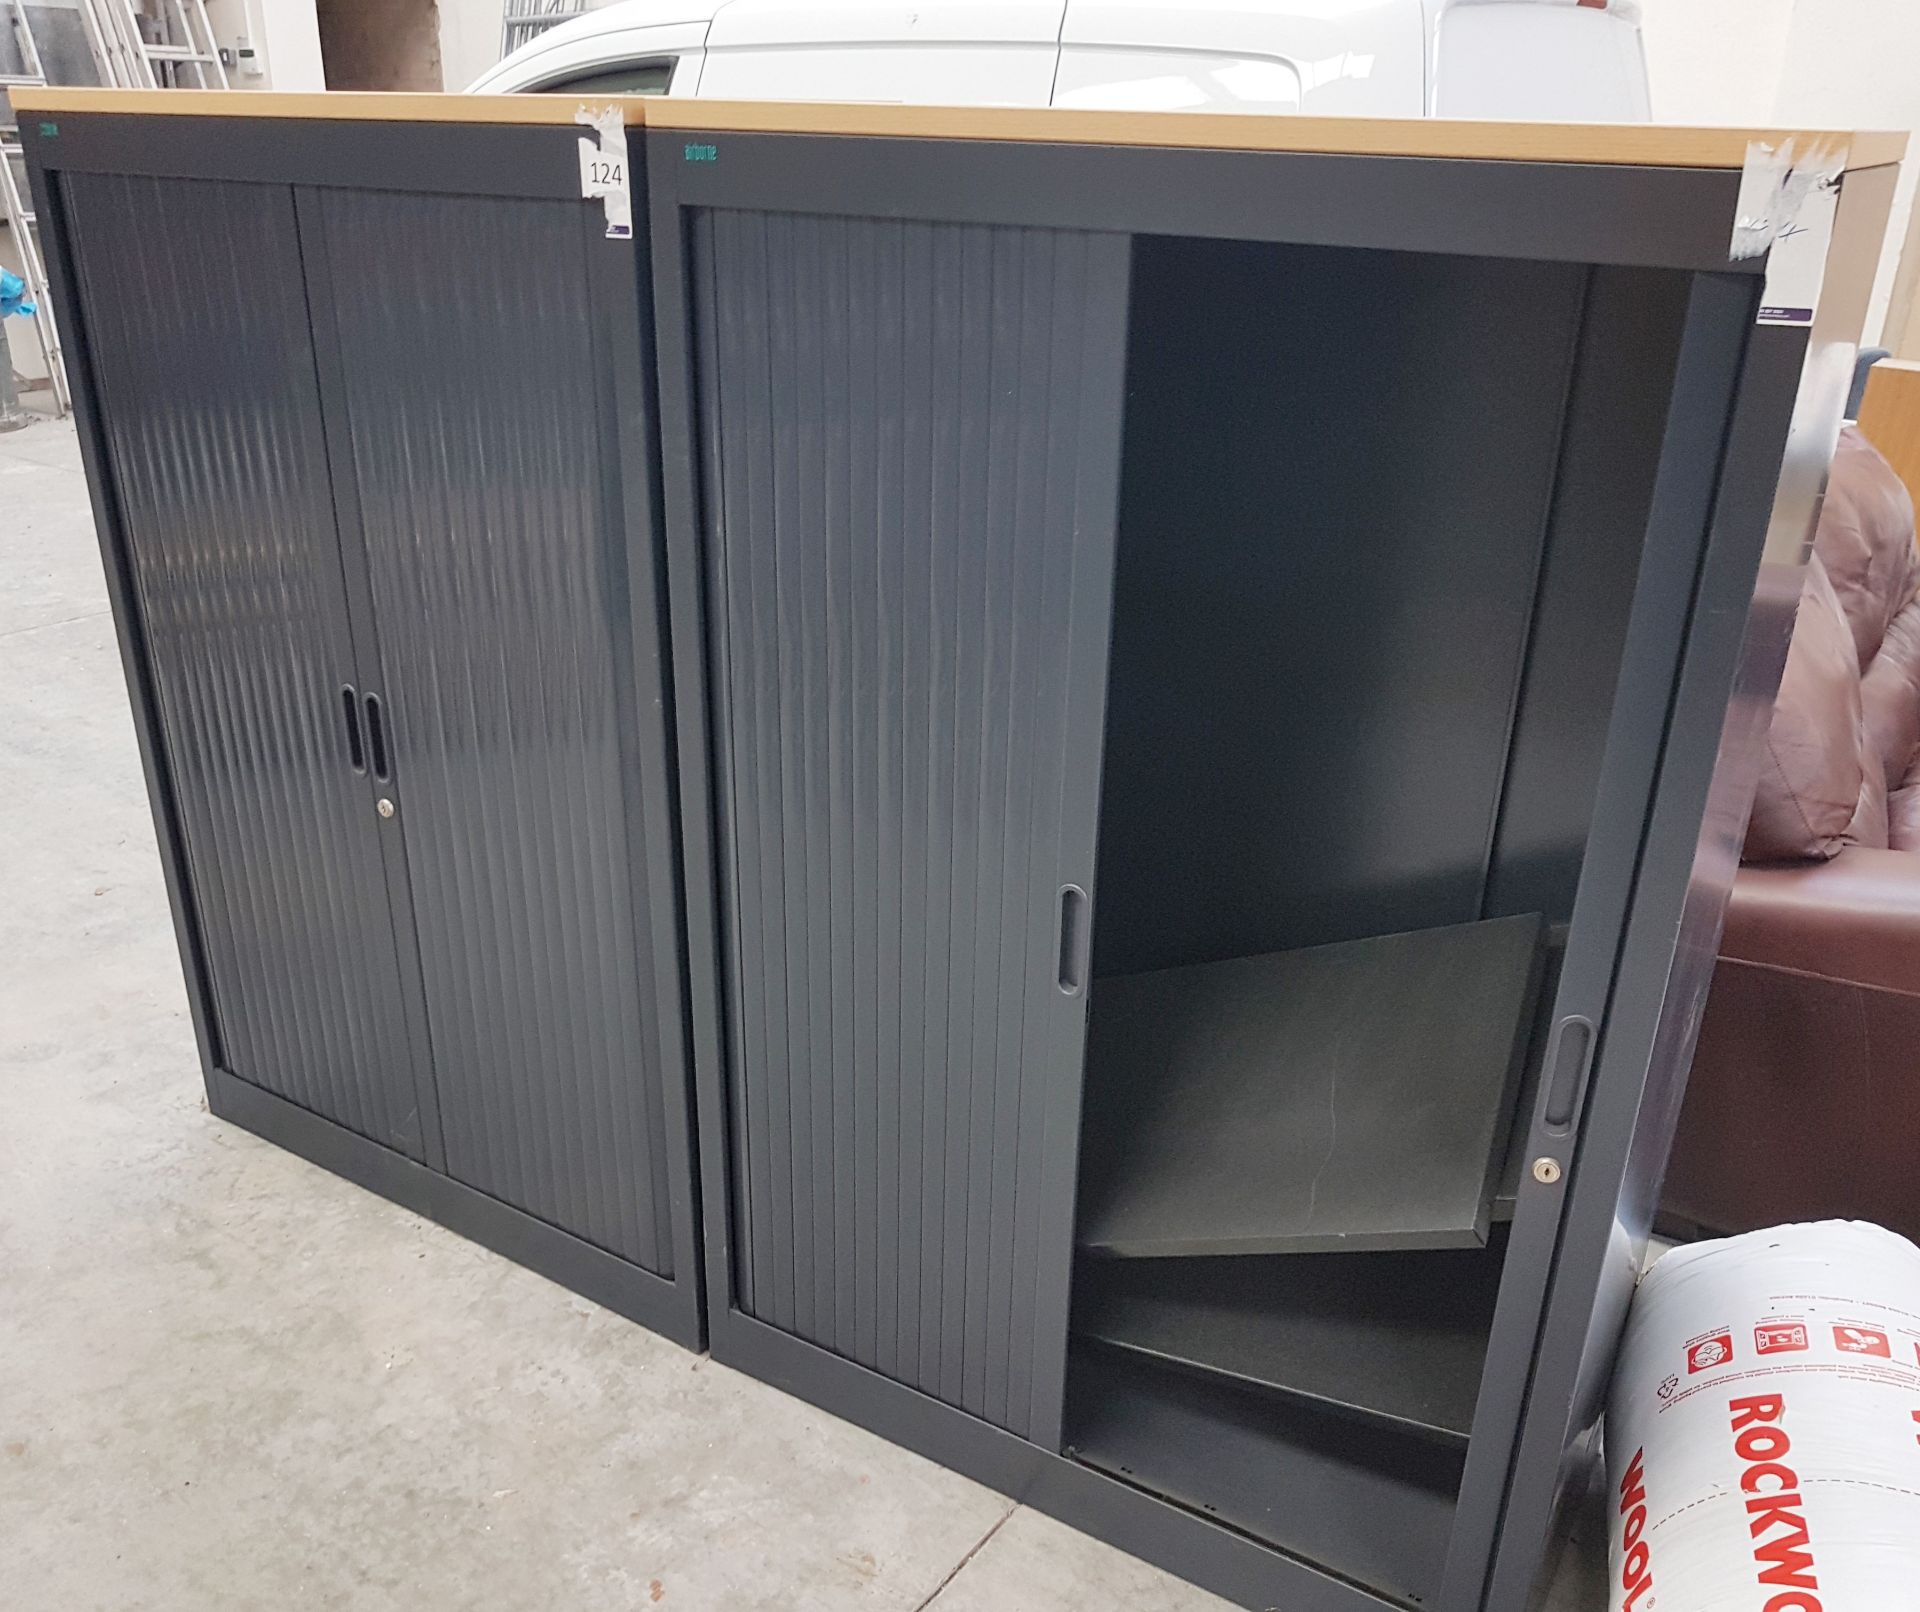 2 x Airbourne Metal Storage Cabinets With Sliding Doors - Dark Grey Finish With Wooden Tops - Image 2 of 4